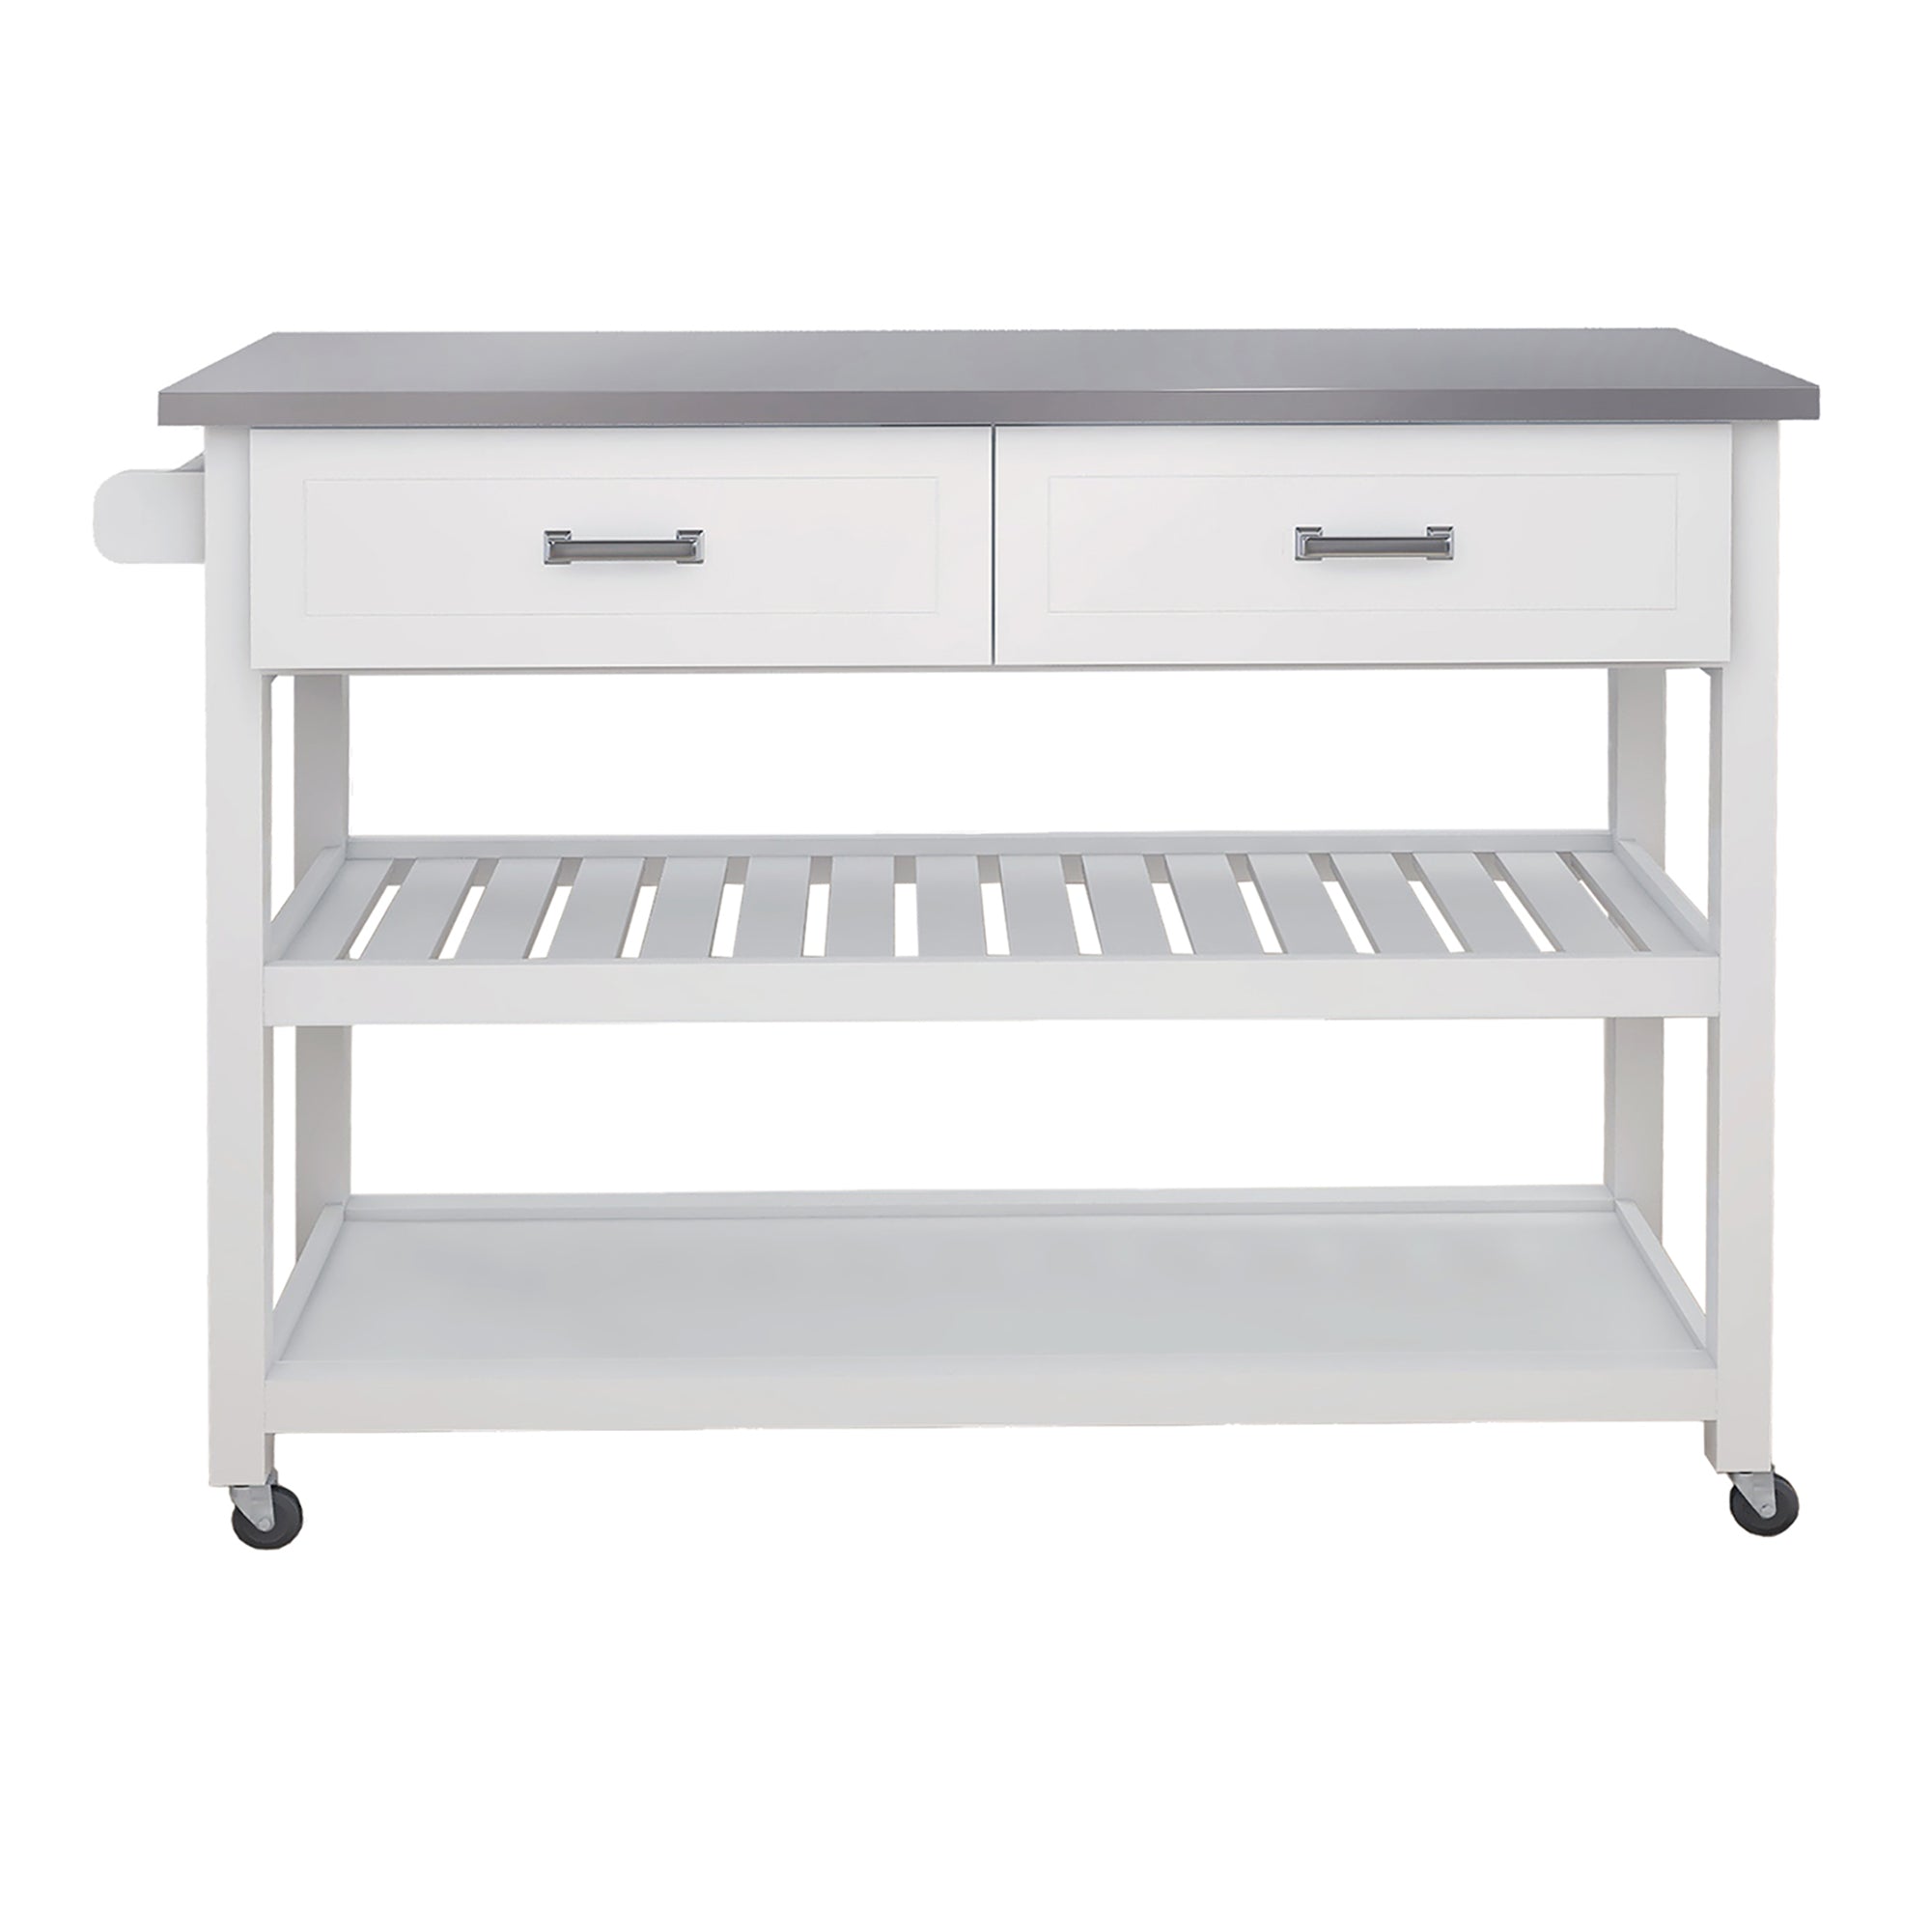 Storage Kitchen Islands on Wheels， BTMWAY Stainless Steel Table Top Kitchen Island Cart with Storage Drawers/Shelf/Towel Bar， Rolling Kitchen Trolley Utility Cart Microwave Cabinets， A5782